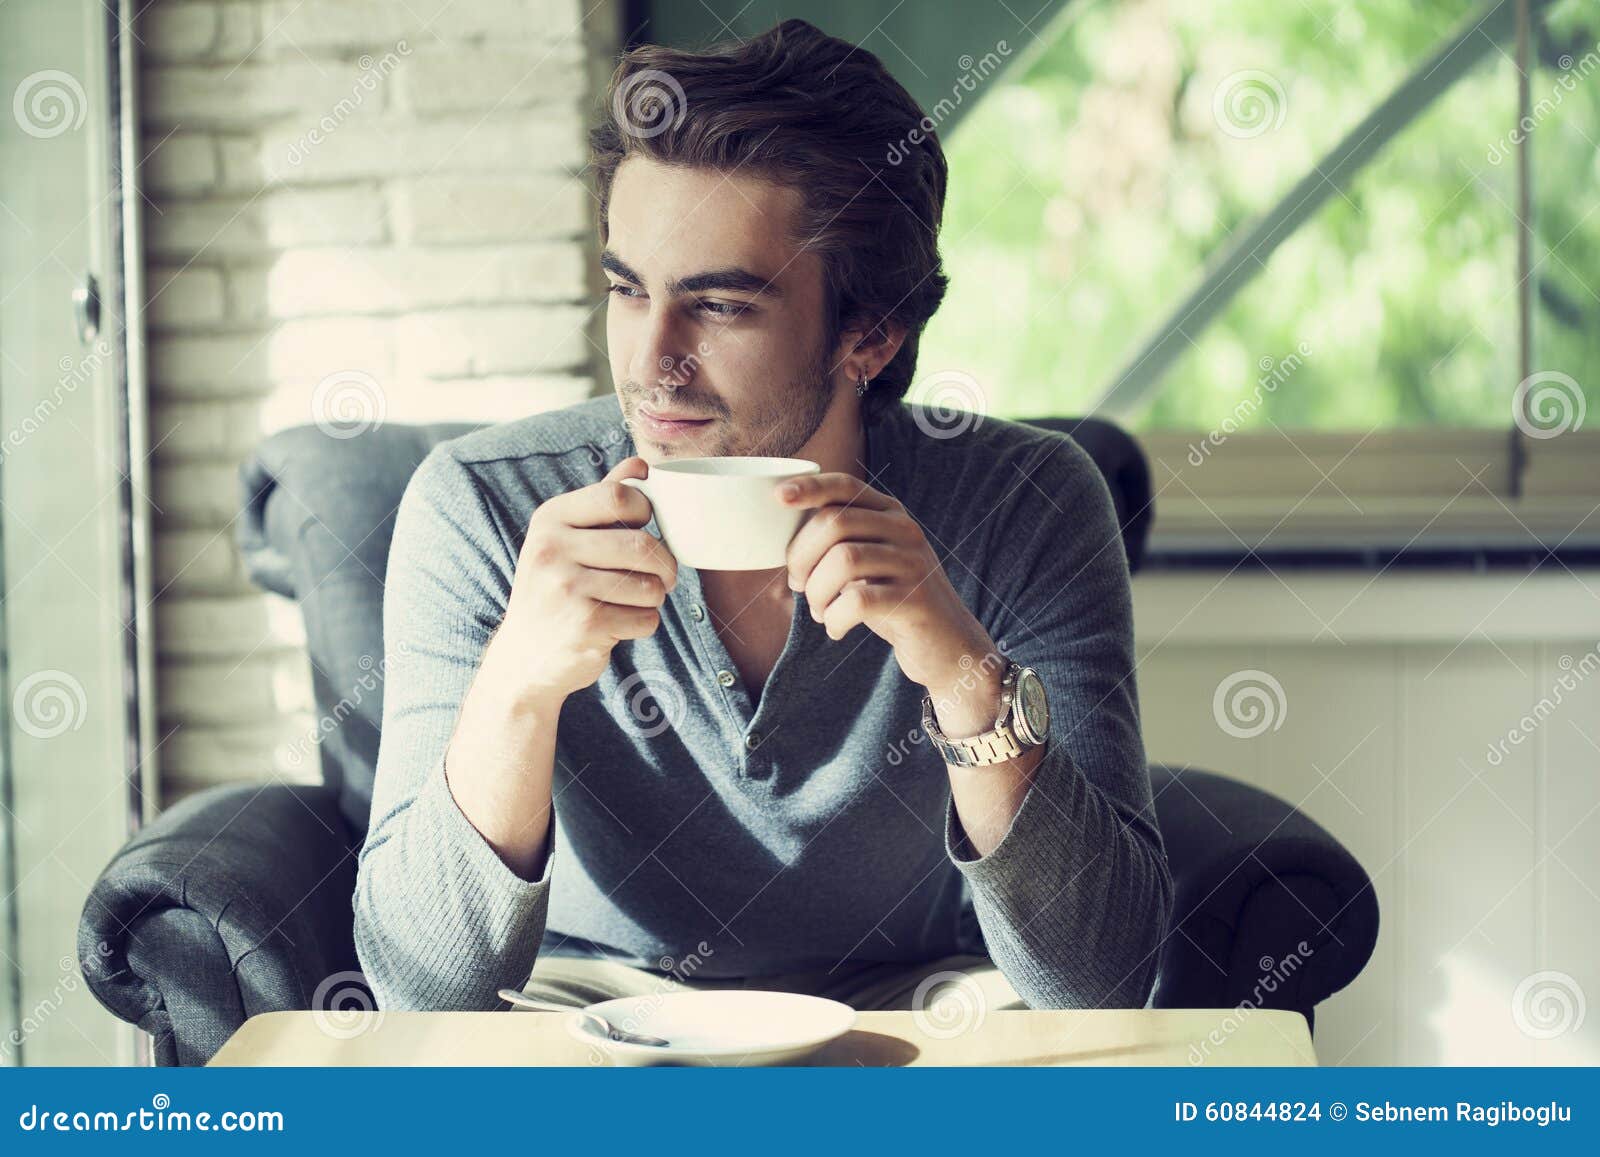 young man drinking coffee in cafe